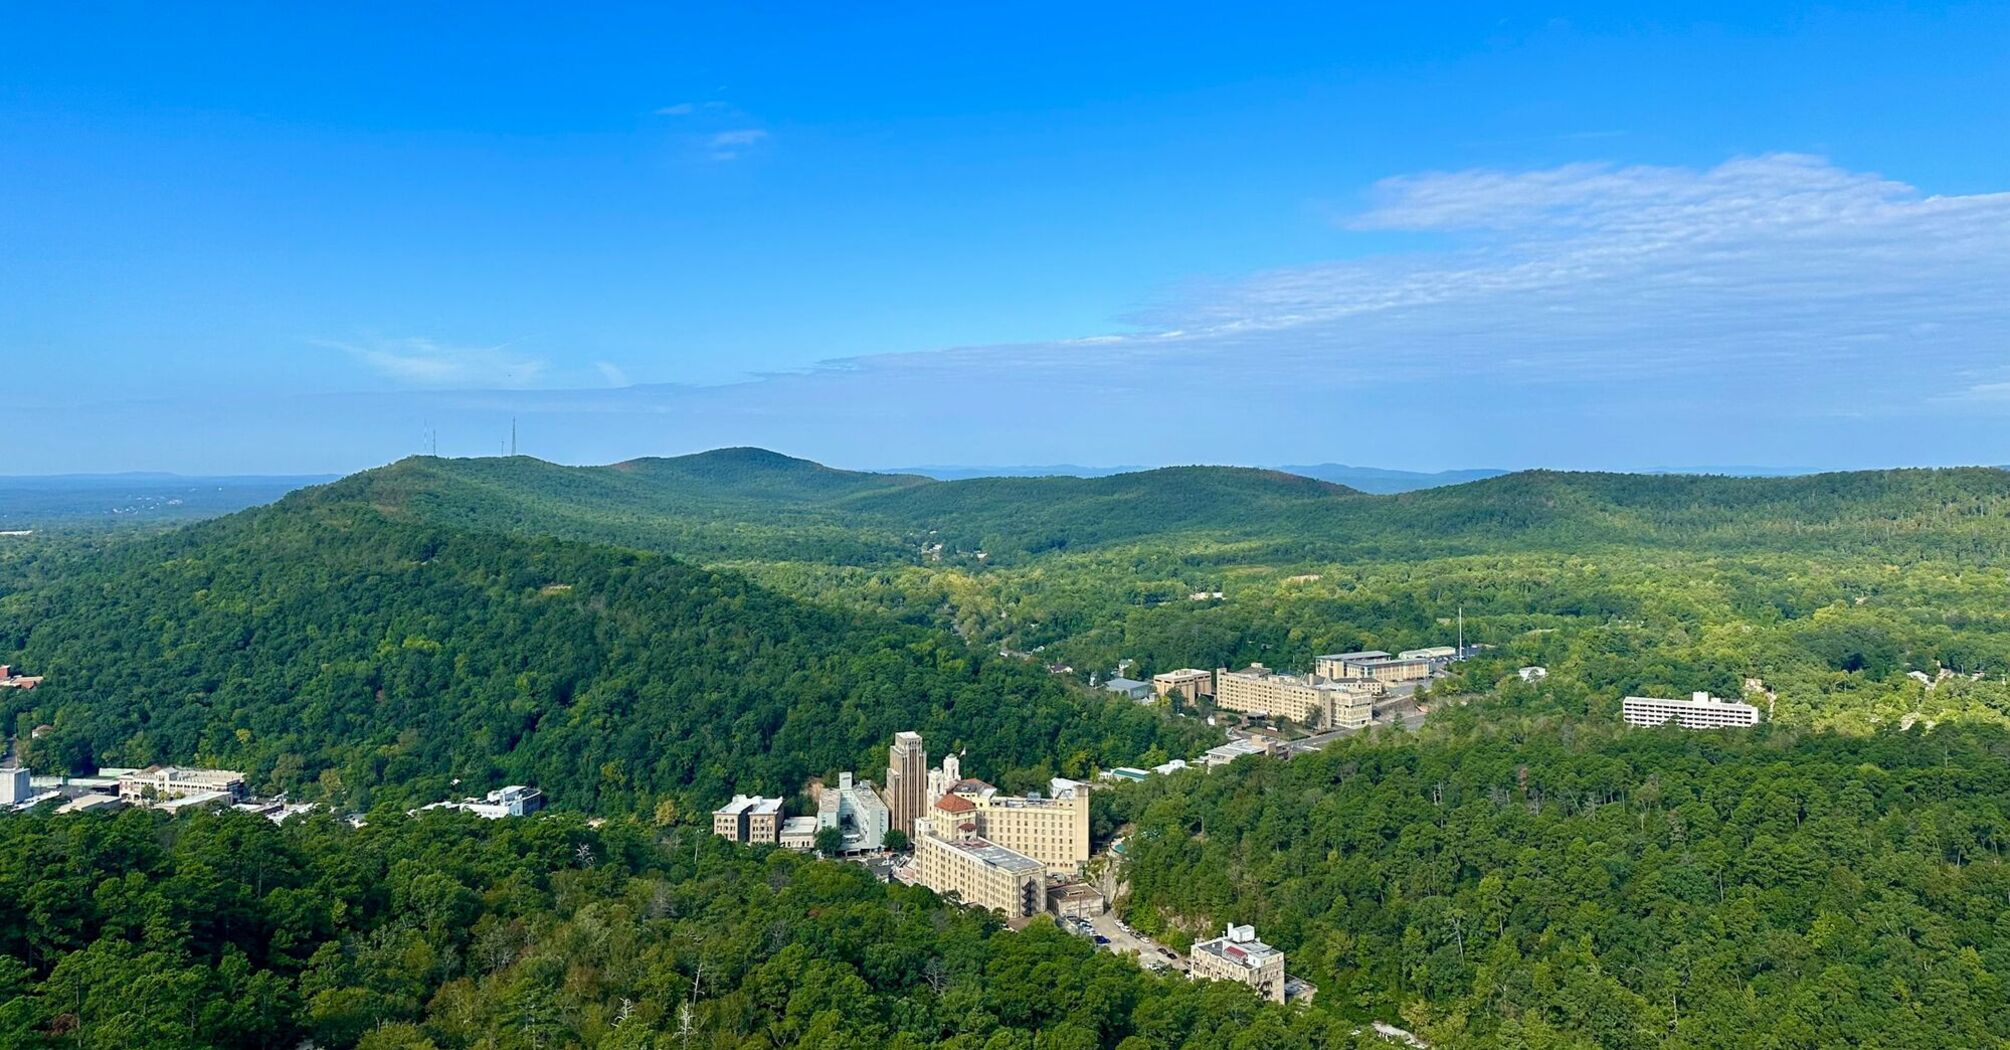 Aerial view of Hot Springs National Park with green hills and buildings nestled among forests in Hot Springs, Arkansas, USA